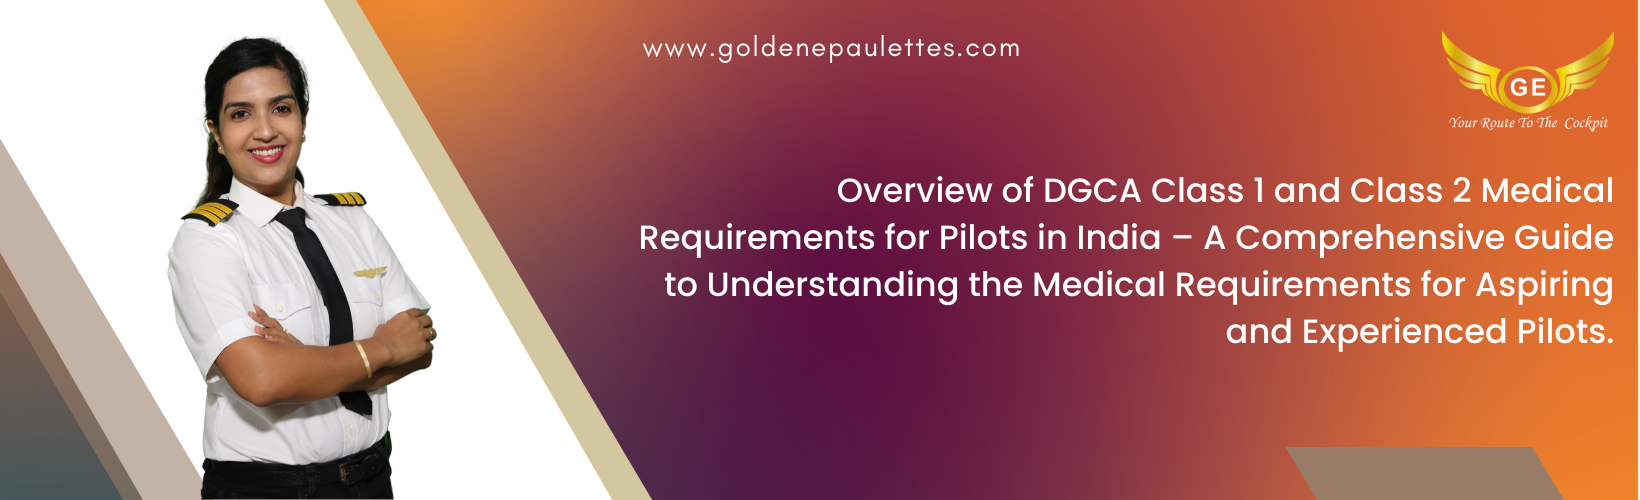 Overview of DGCA Class 1 and Class 2 Medicals for Pilots – A comprehensive guide to understanding the medical requirements for aspiring and experienced pilots in India. (Pilot Career)